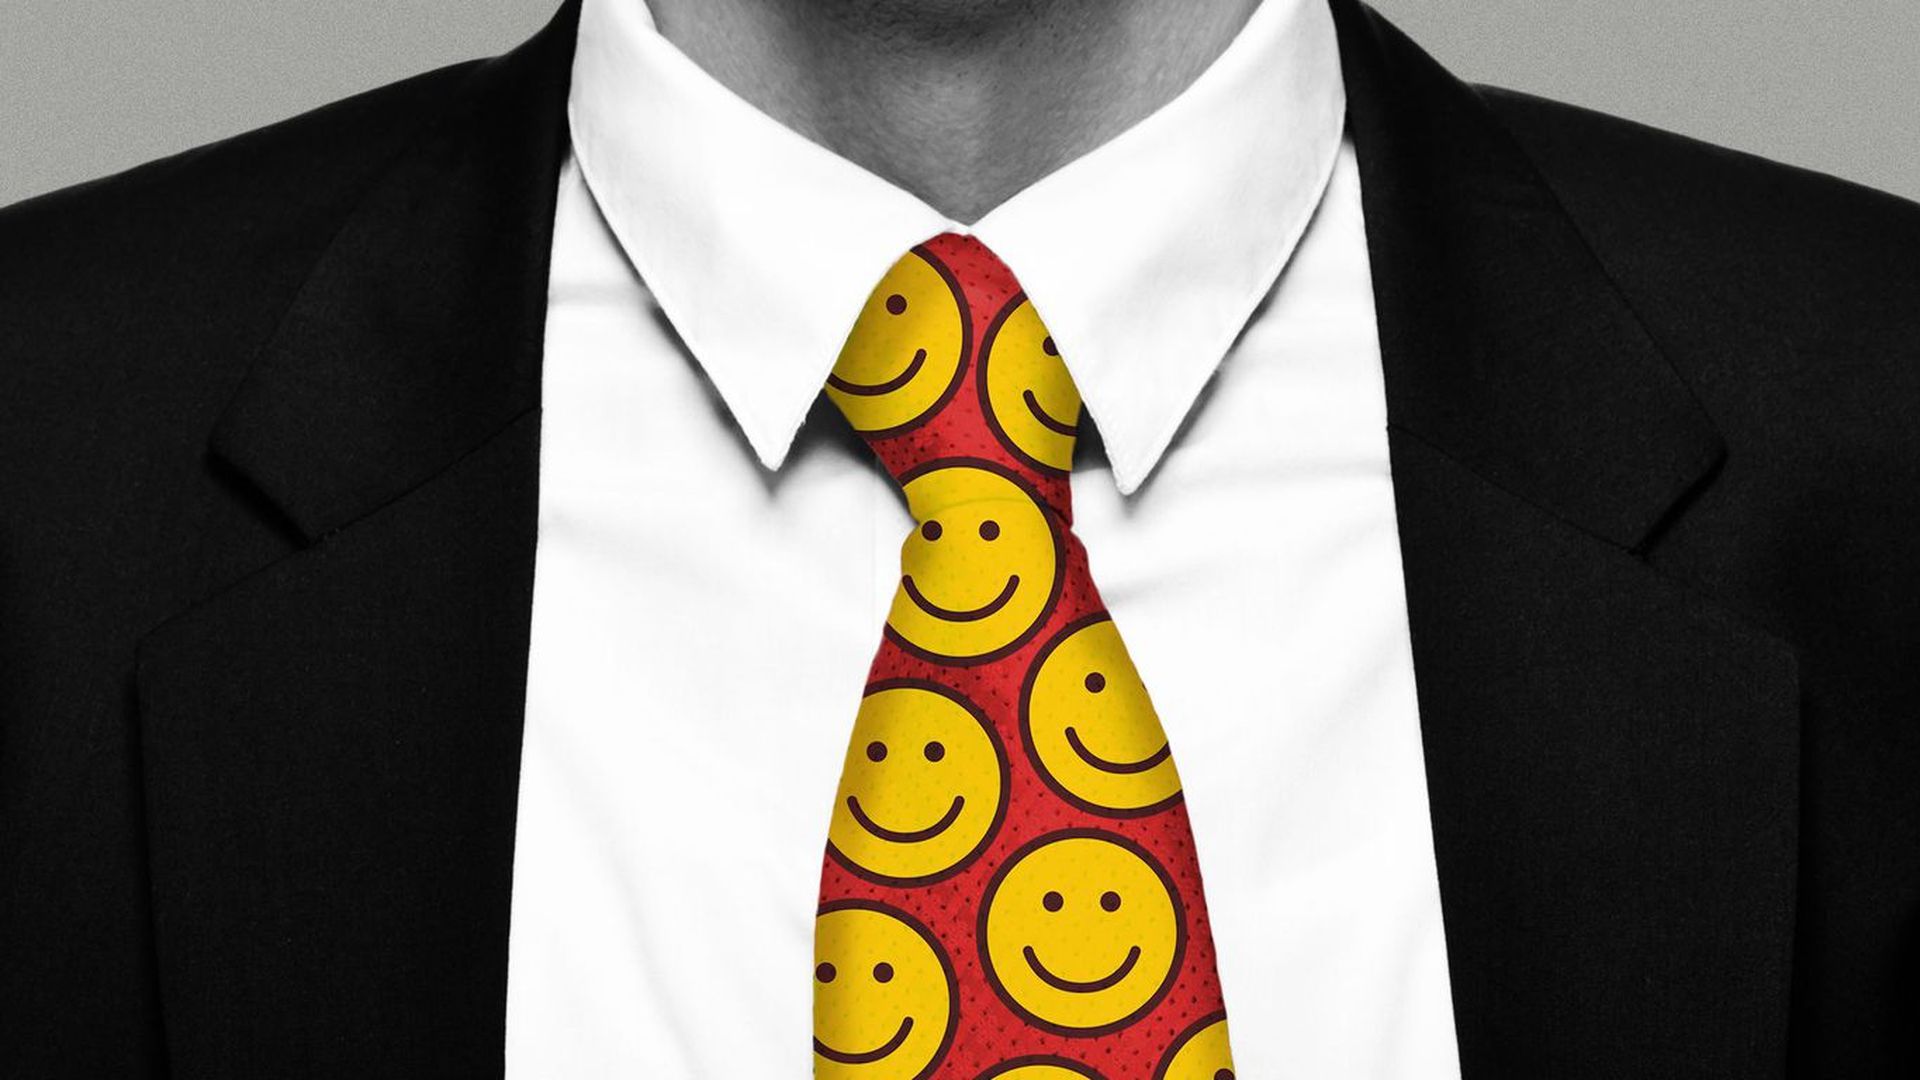 An tie with smiley faces